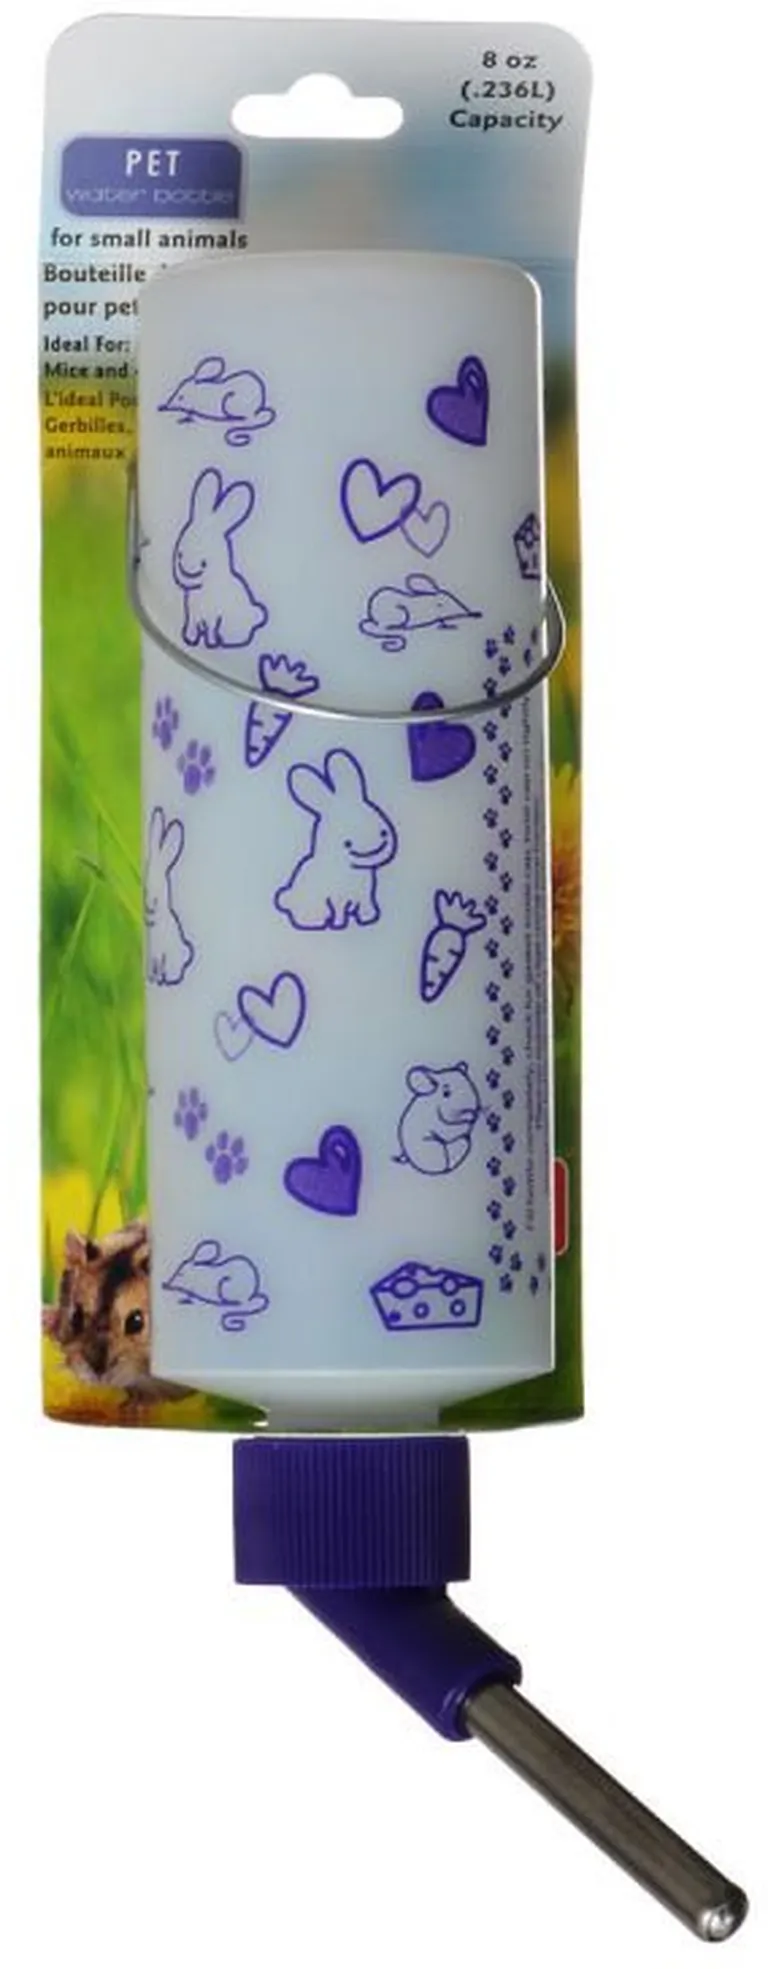 Lixit Pet Water Bottle for Small Animals Photo 2